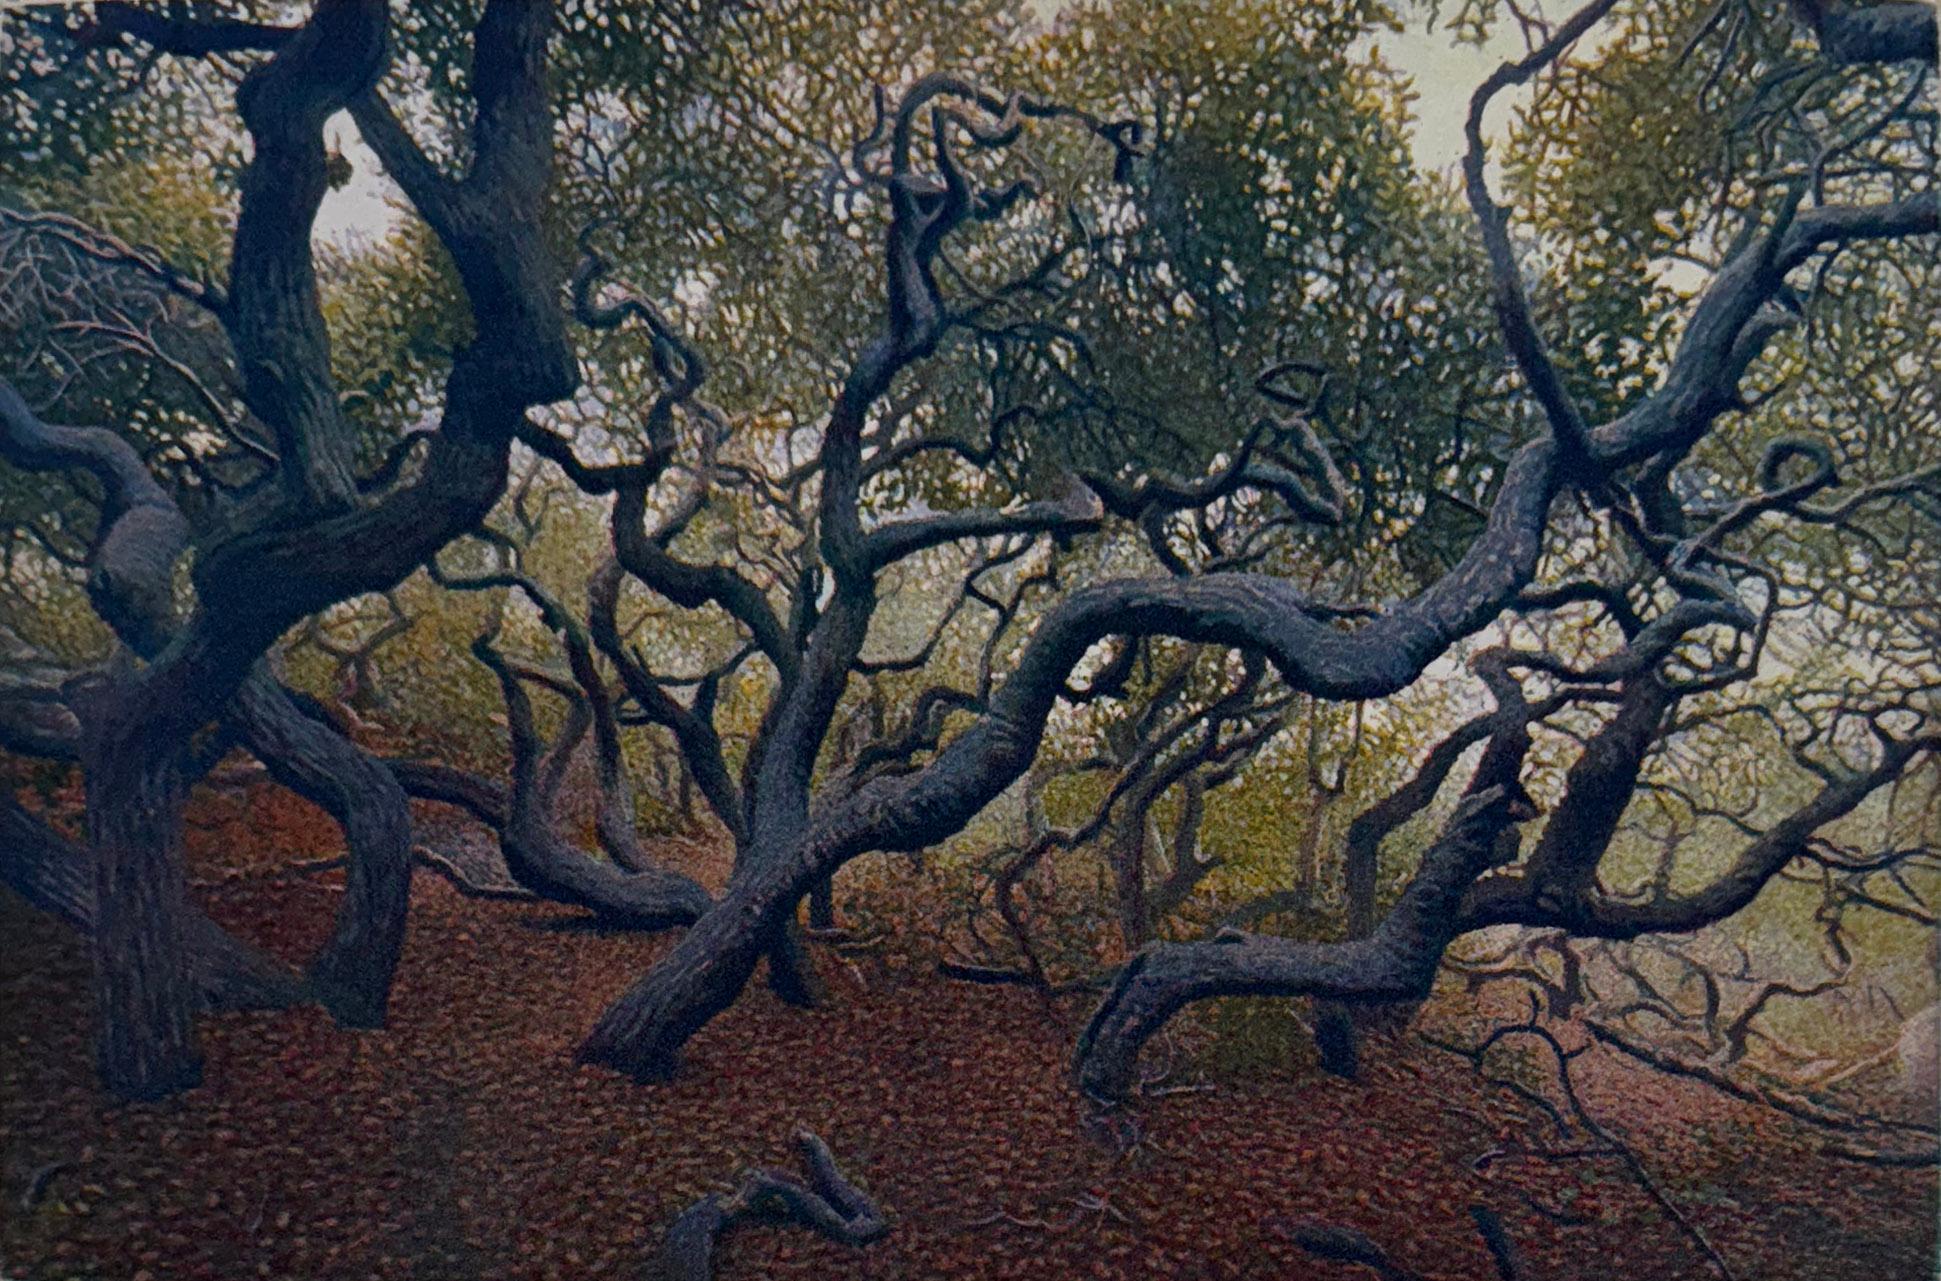 Elfin Forest, by Stephen McMillan